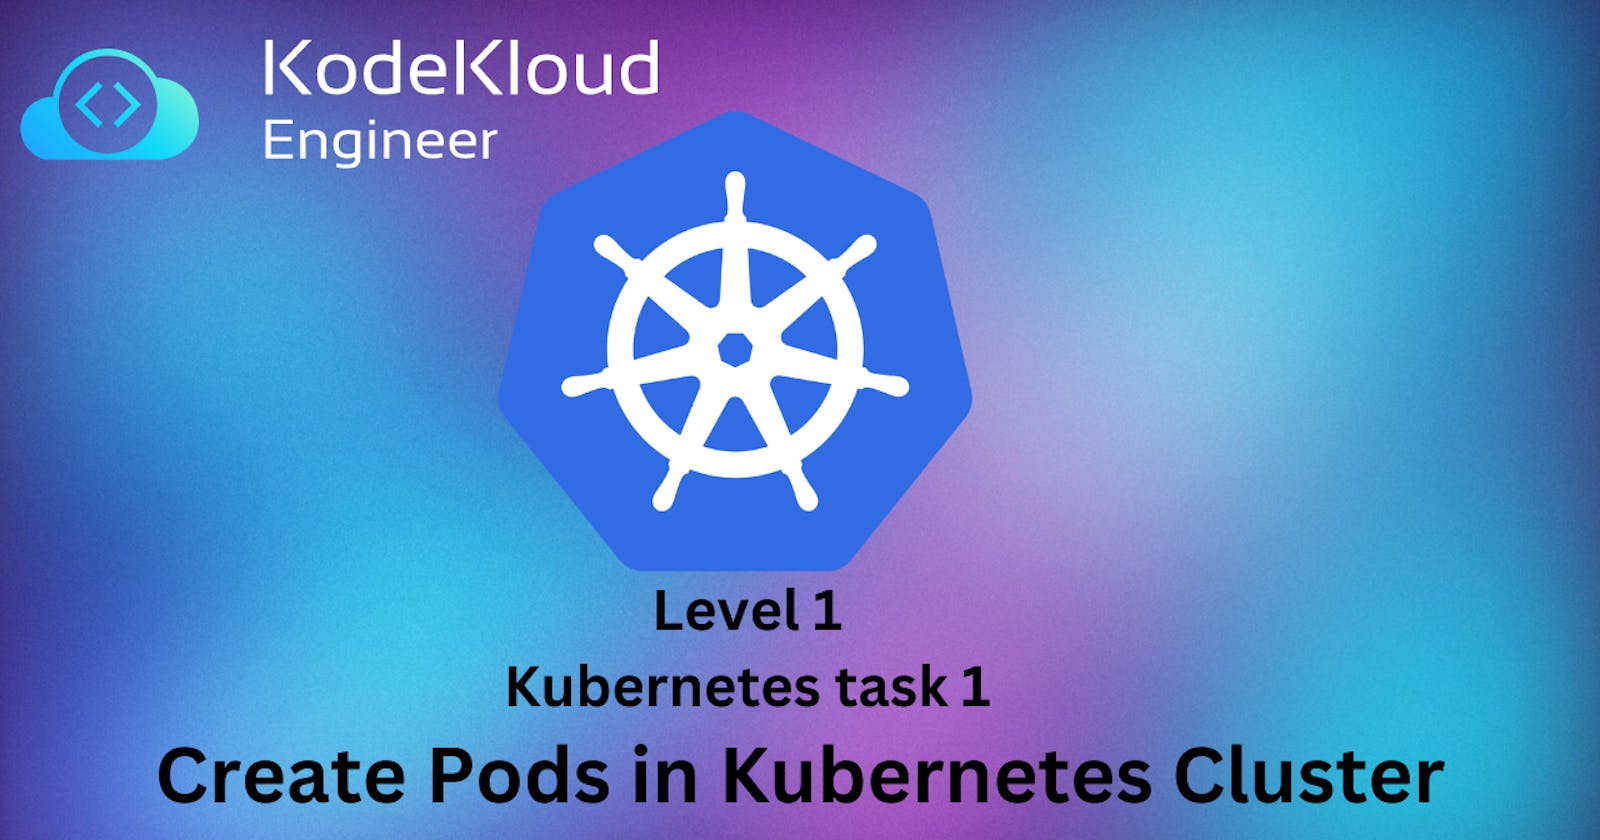 Step by step approach of Kubernetes task on creating a Pod by the KodeKloud Engineer Program: